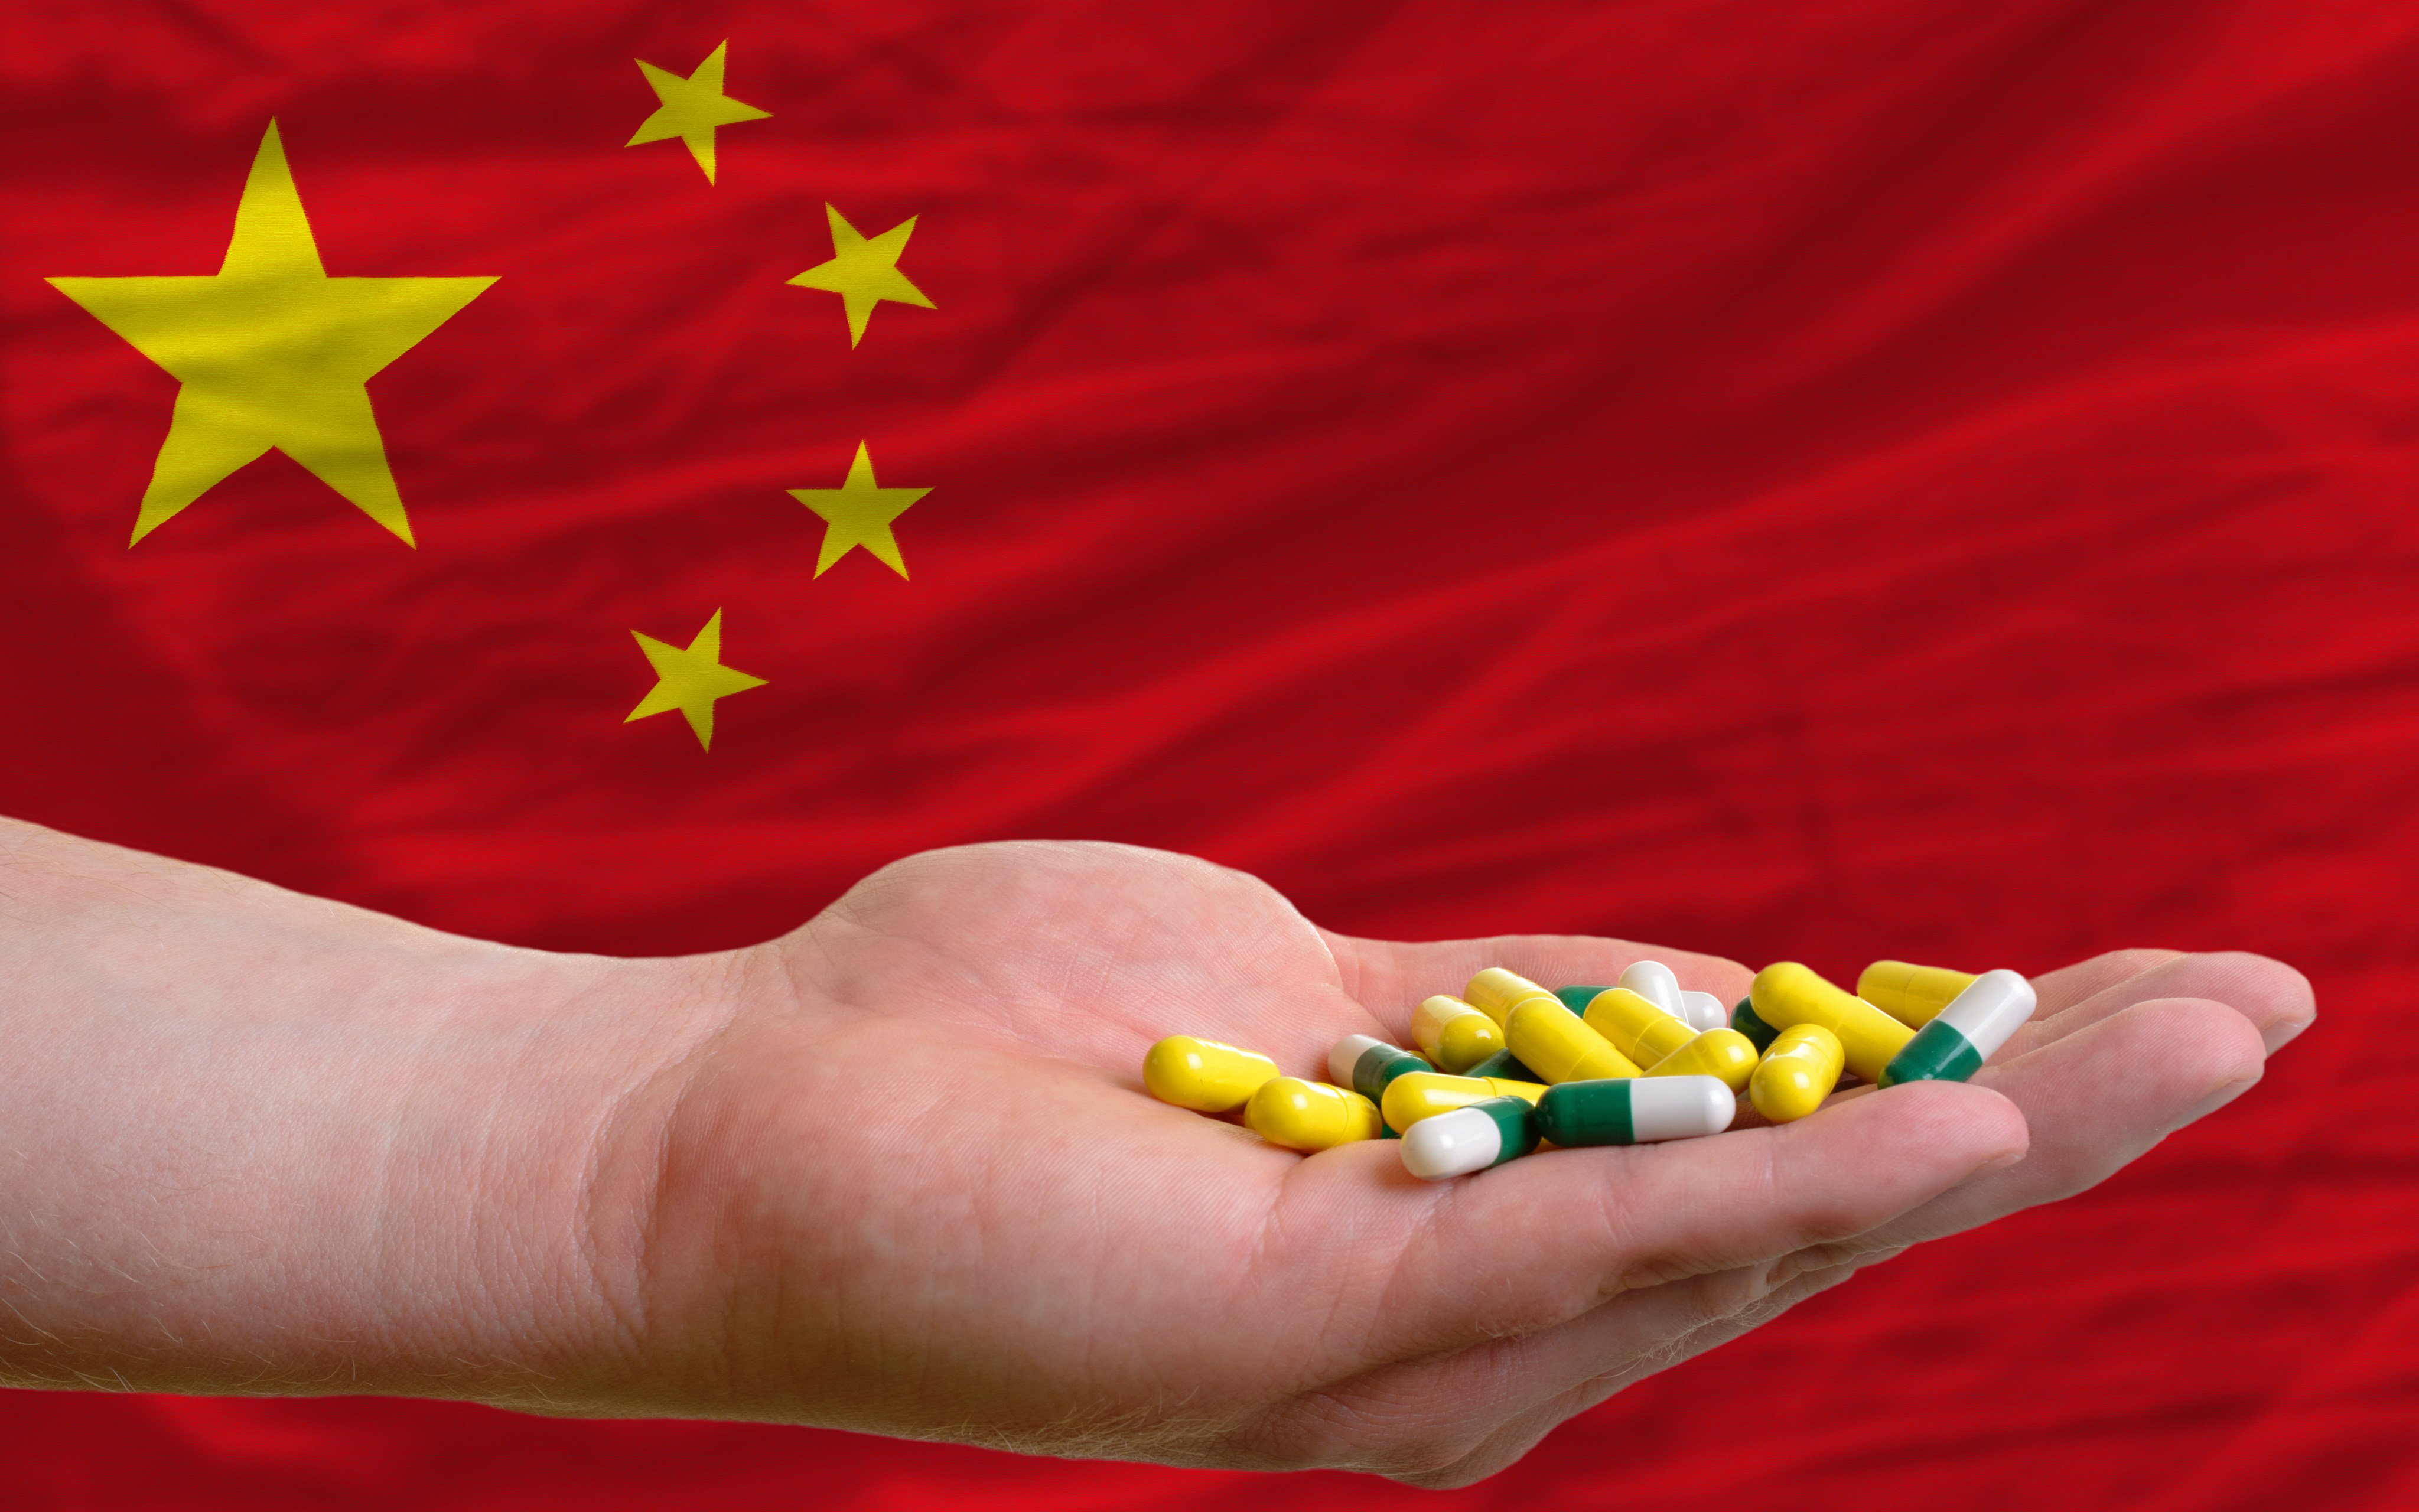 China’s pharmaceutical e-commerce sales are forecast to grow to US$26.3 million by 2028 and account for almost a third of retail sales. Photo: Shutterstock